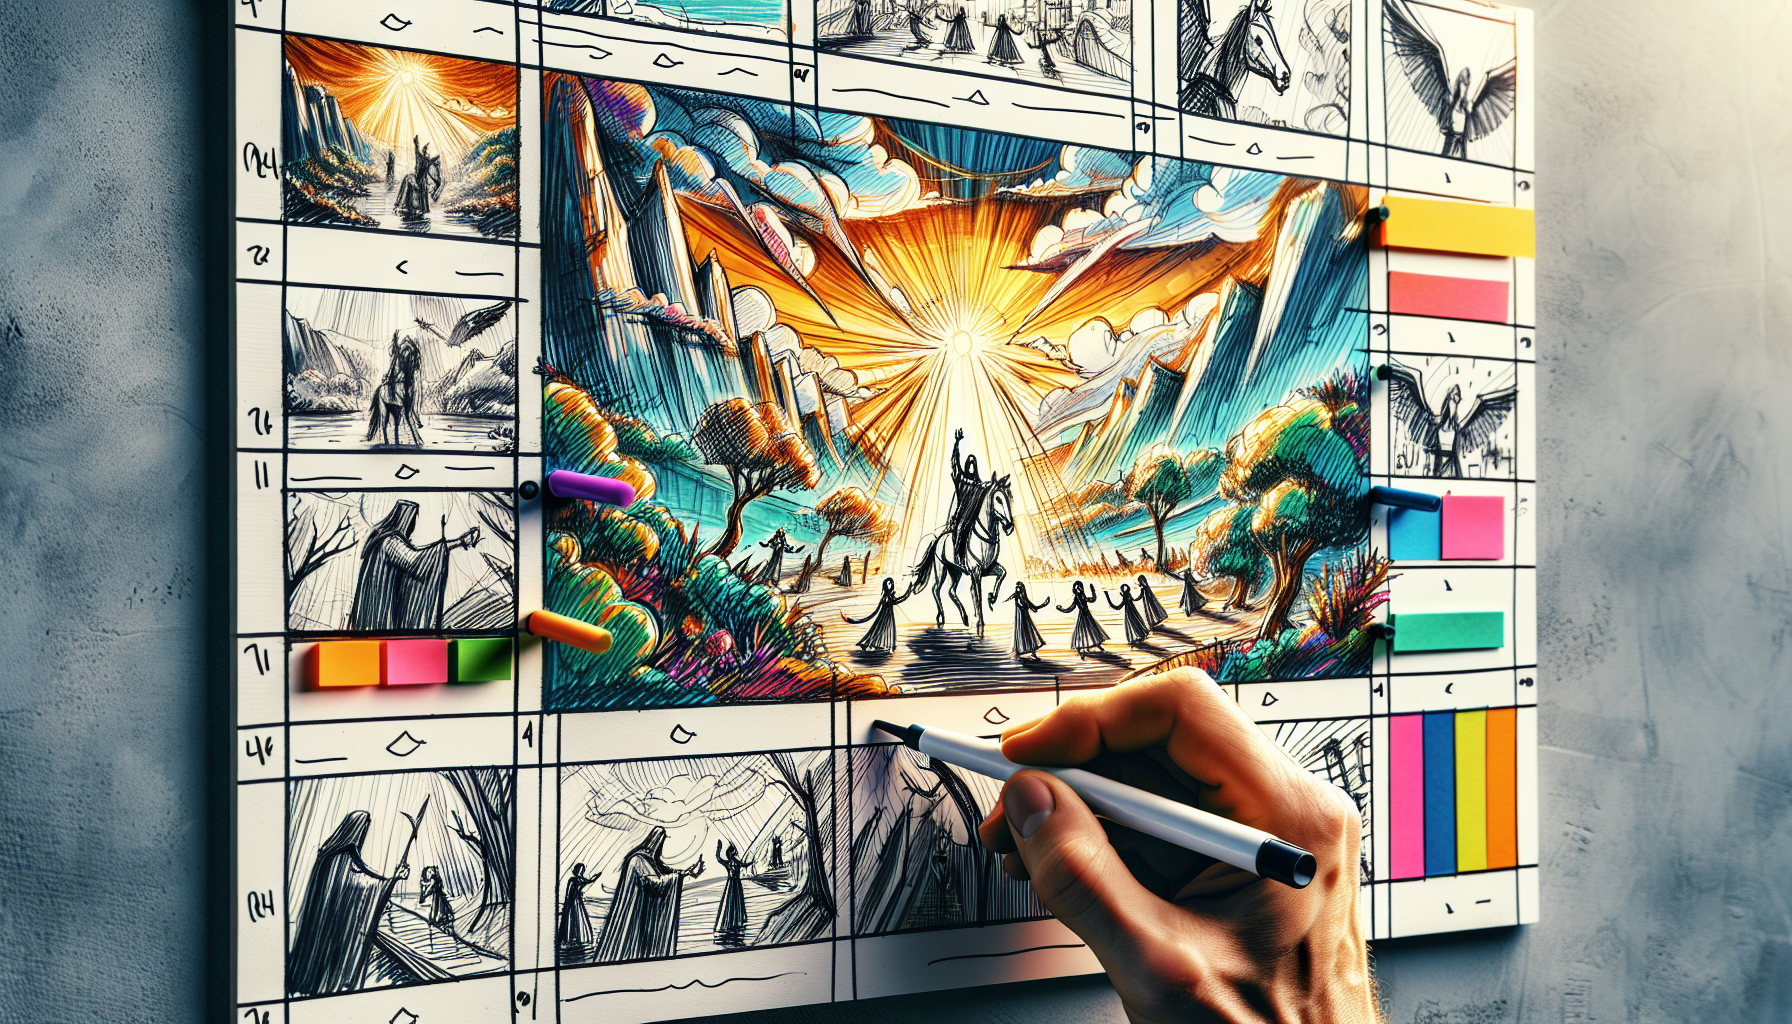 An artist's hand drawing a scene on a storyboard depicting the climactic moment in an animated movie, with characters celebrating a victory on a fantastical landscape, sketches and colorful notes surr